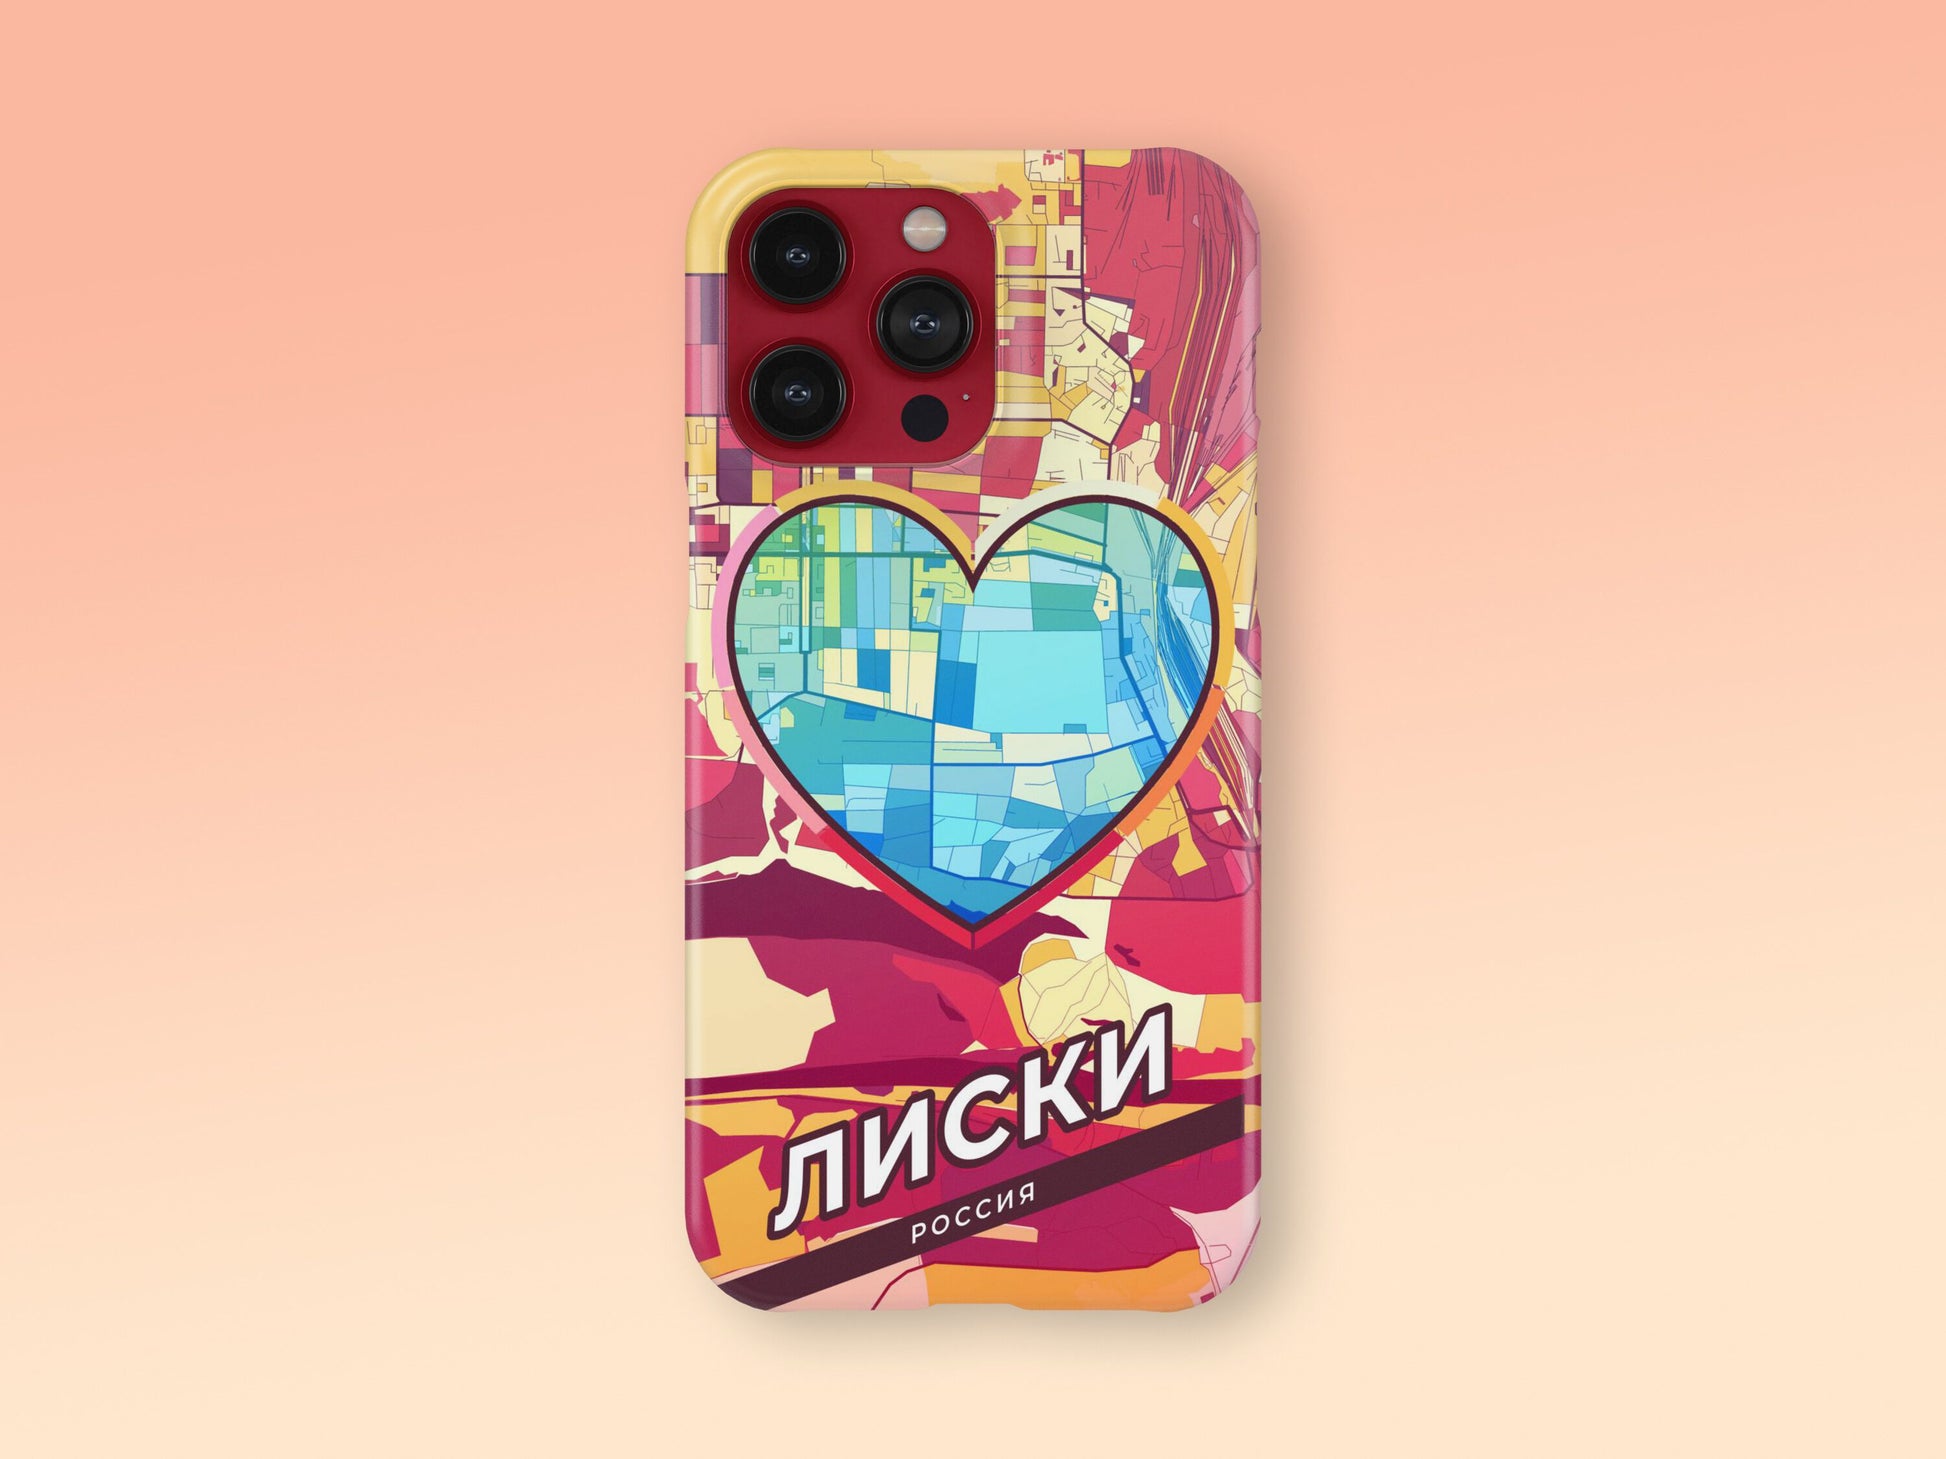 Liski Russia slim phone case with colorful icon. Birthday, wedding or housewarming gift. Couple match cases. 2